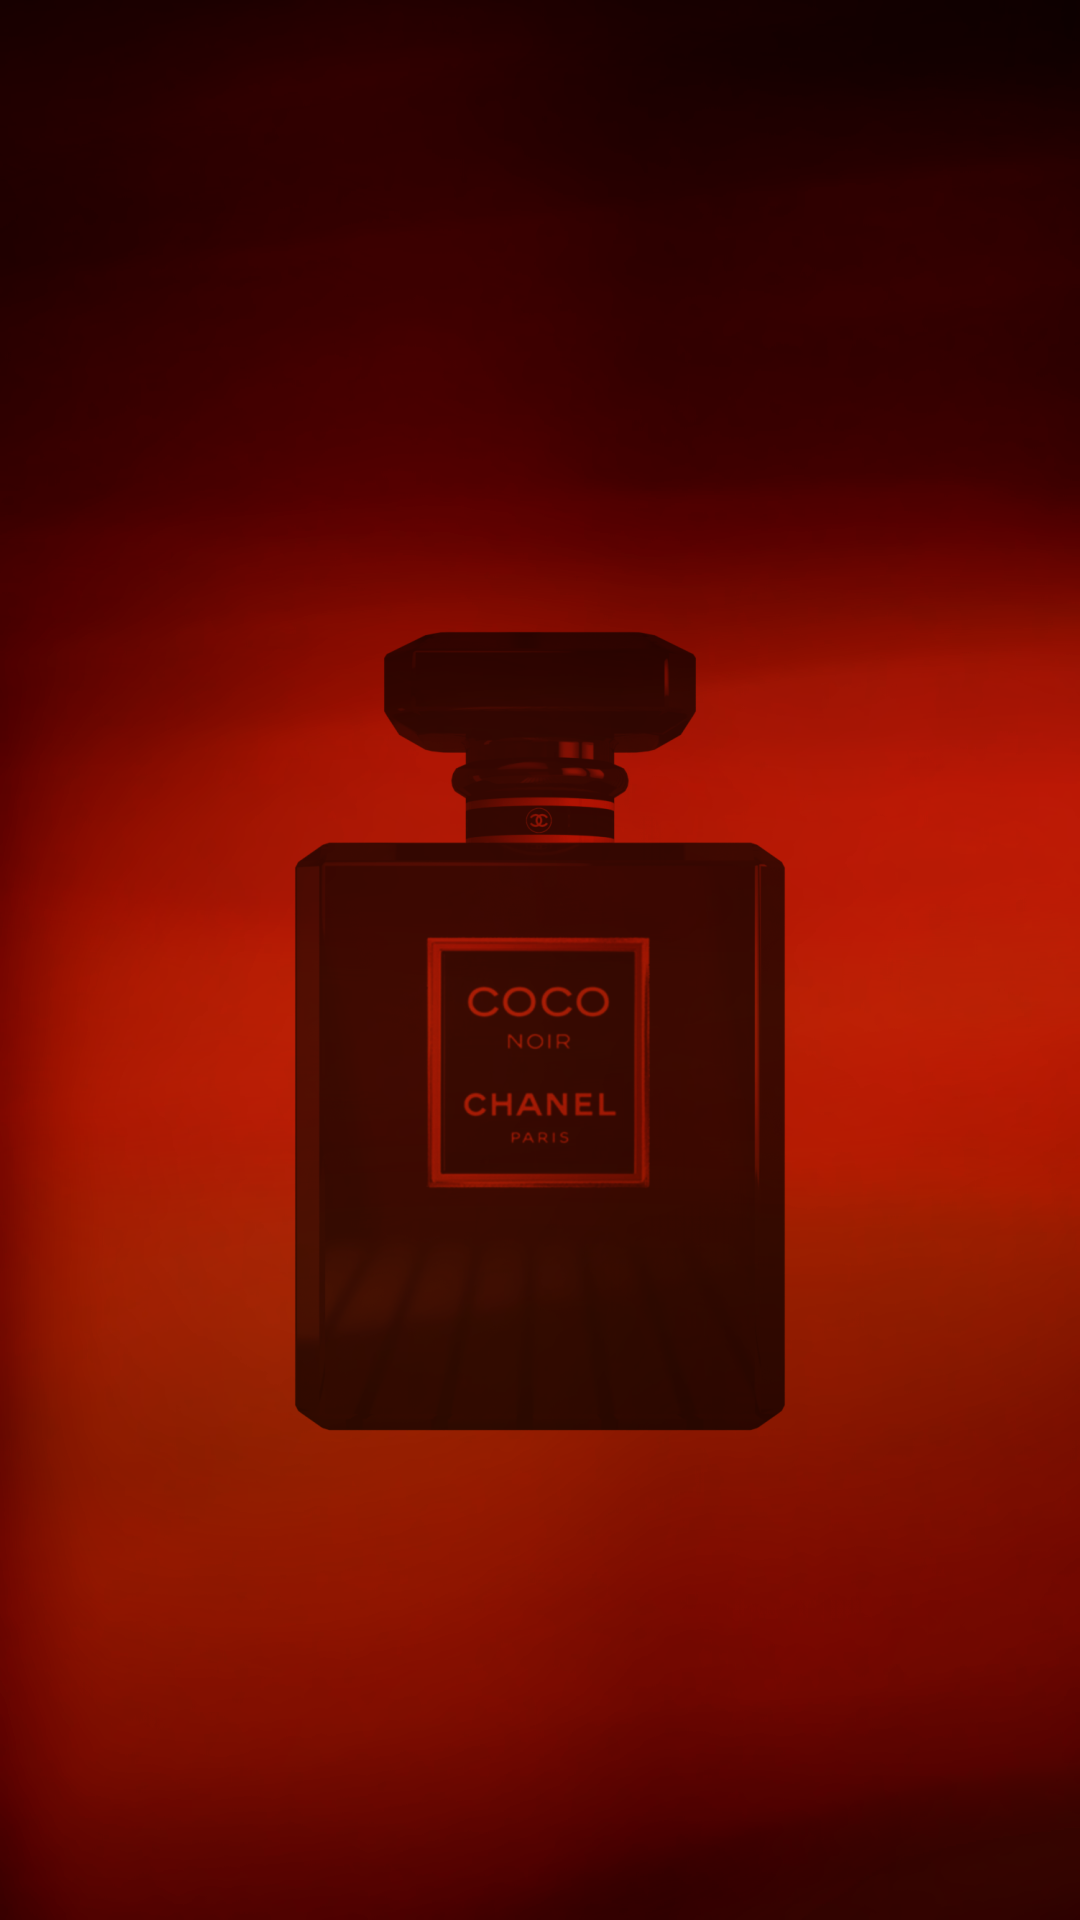 Chanel N°5 Limited Edition + Chanel Coco Noir — Ines Leite